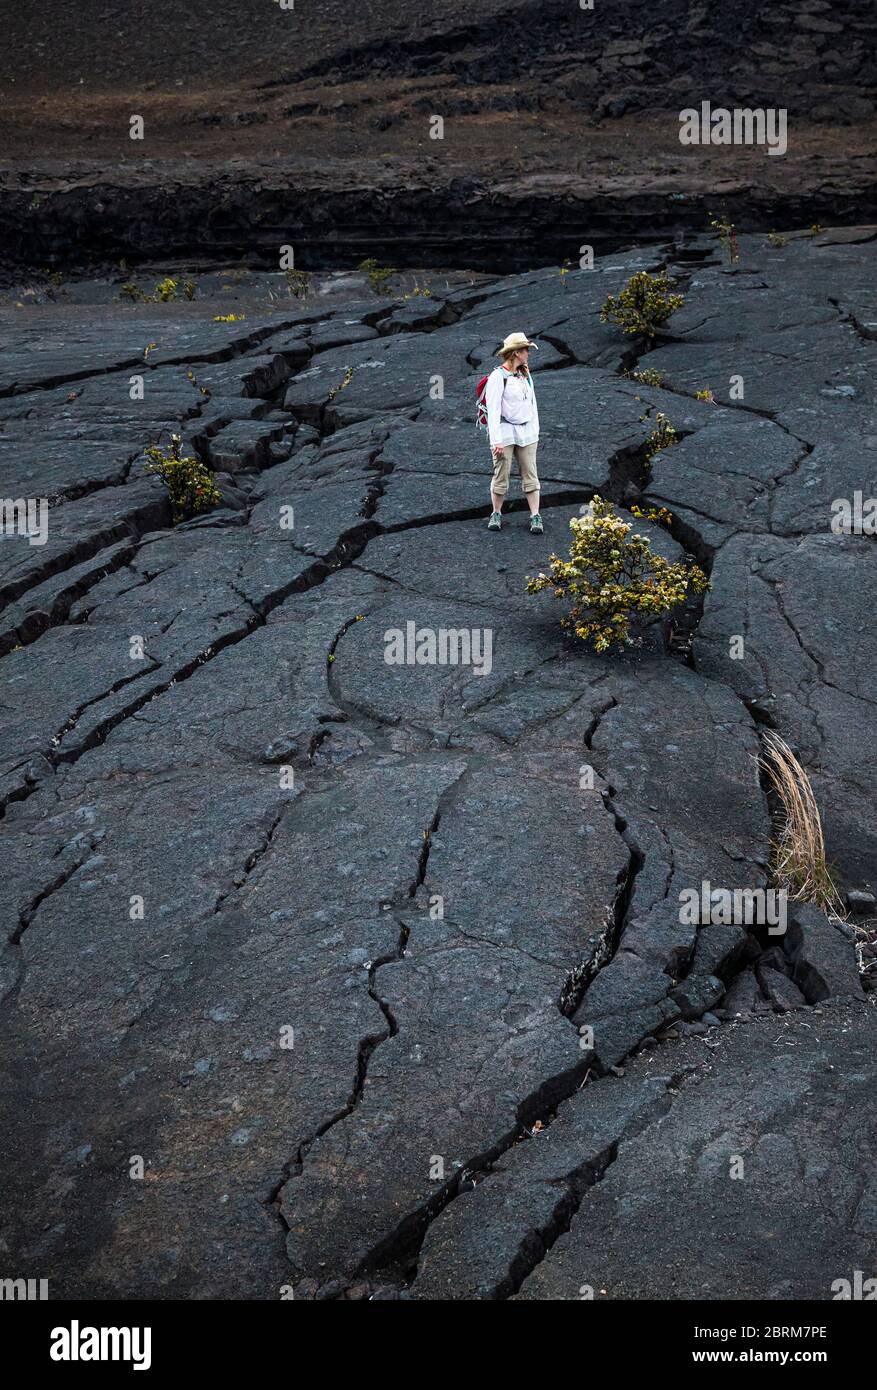 A woman stands on the cracked lava of floor of  Kilauea Iki crater, Hawaii Volcanoes National Park, Hawai'i, USA Stock Photo